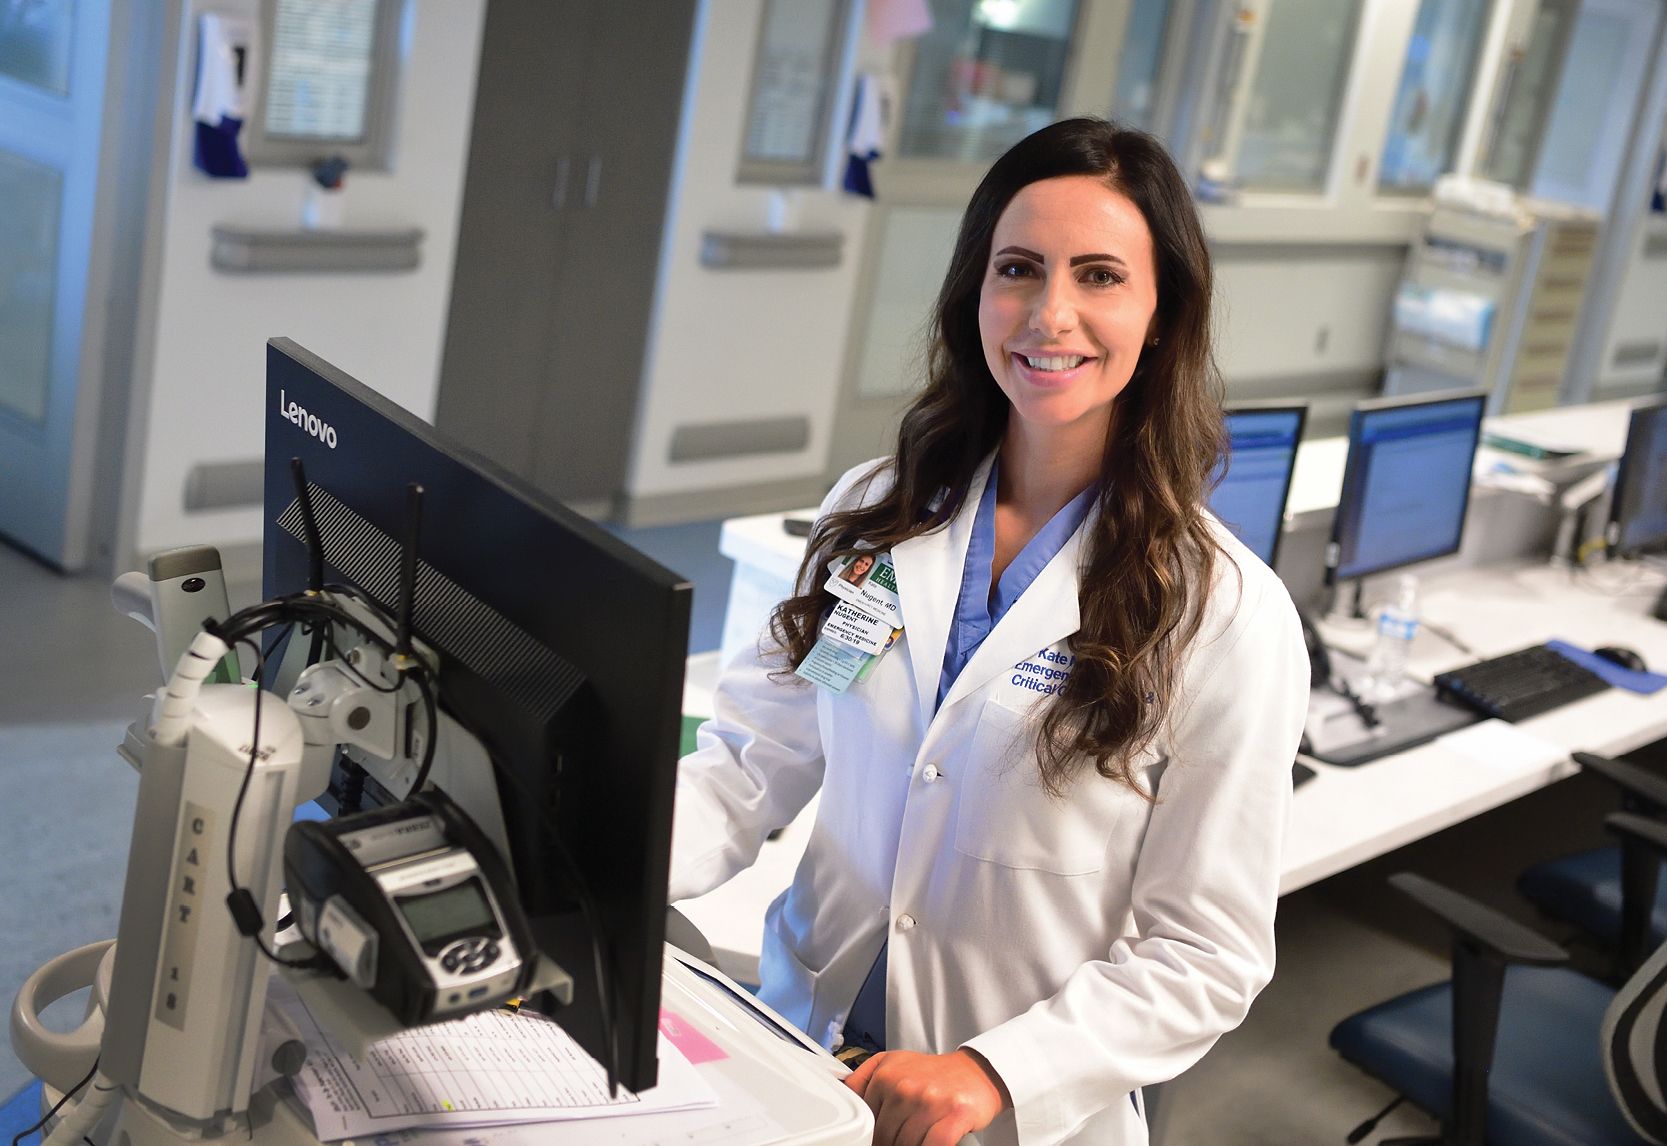 An image of ICU physician Kate Nugent smiling and working at her work station